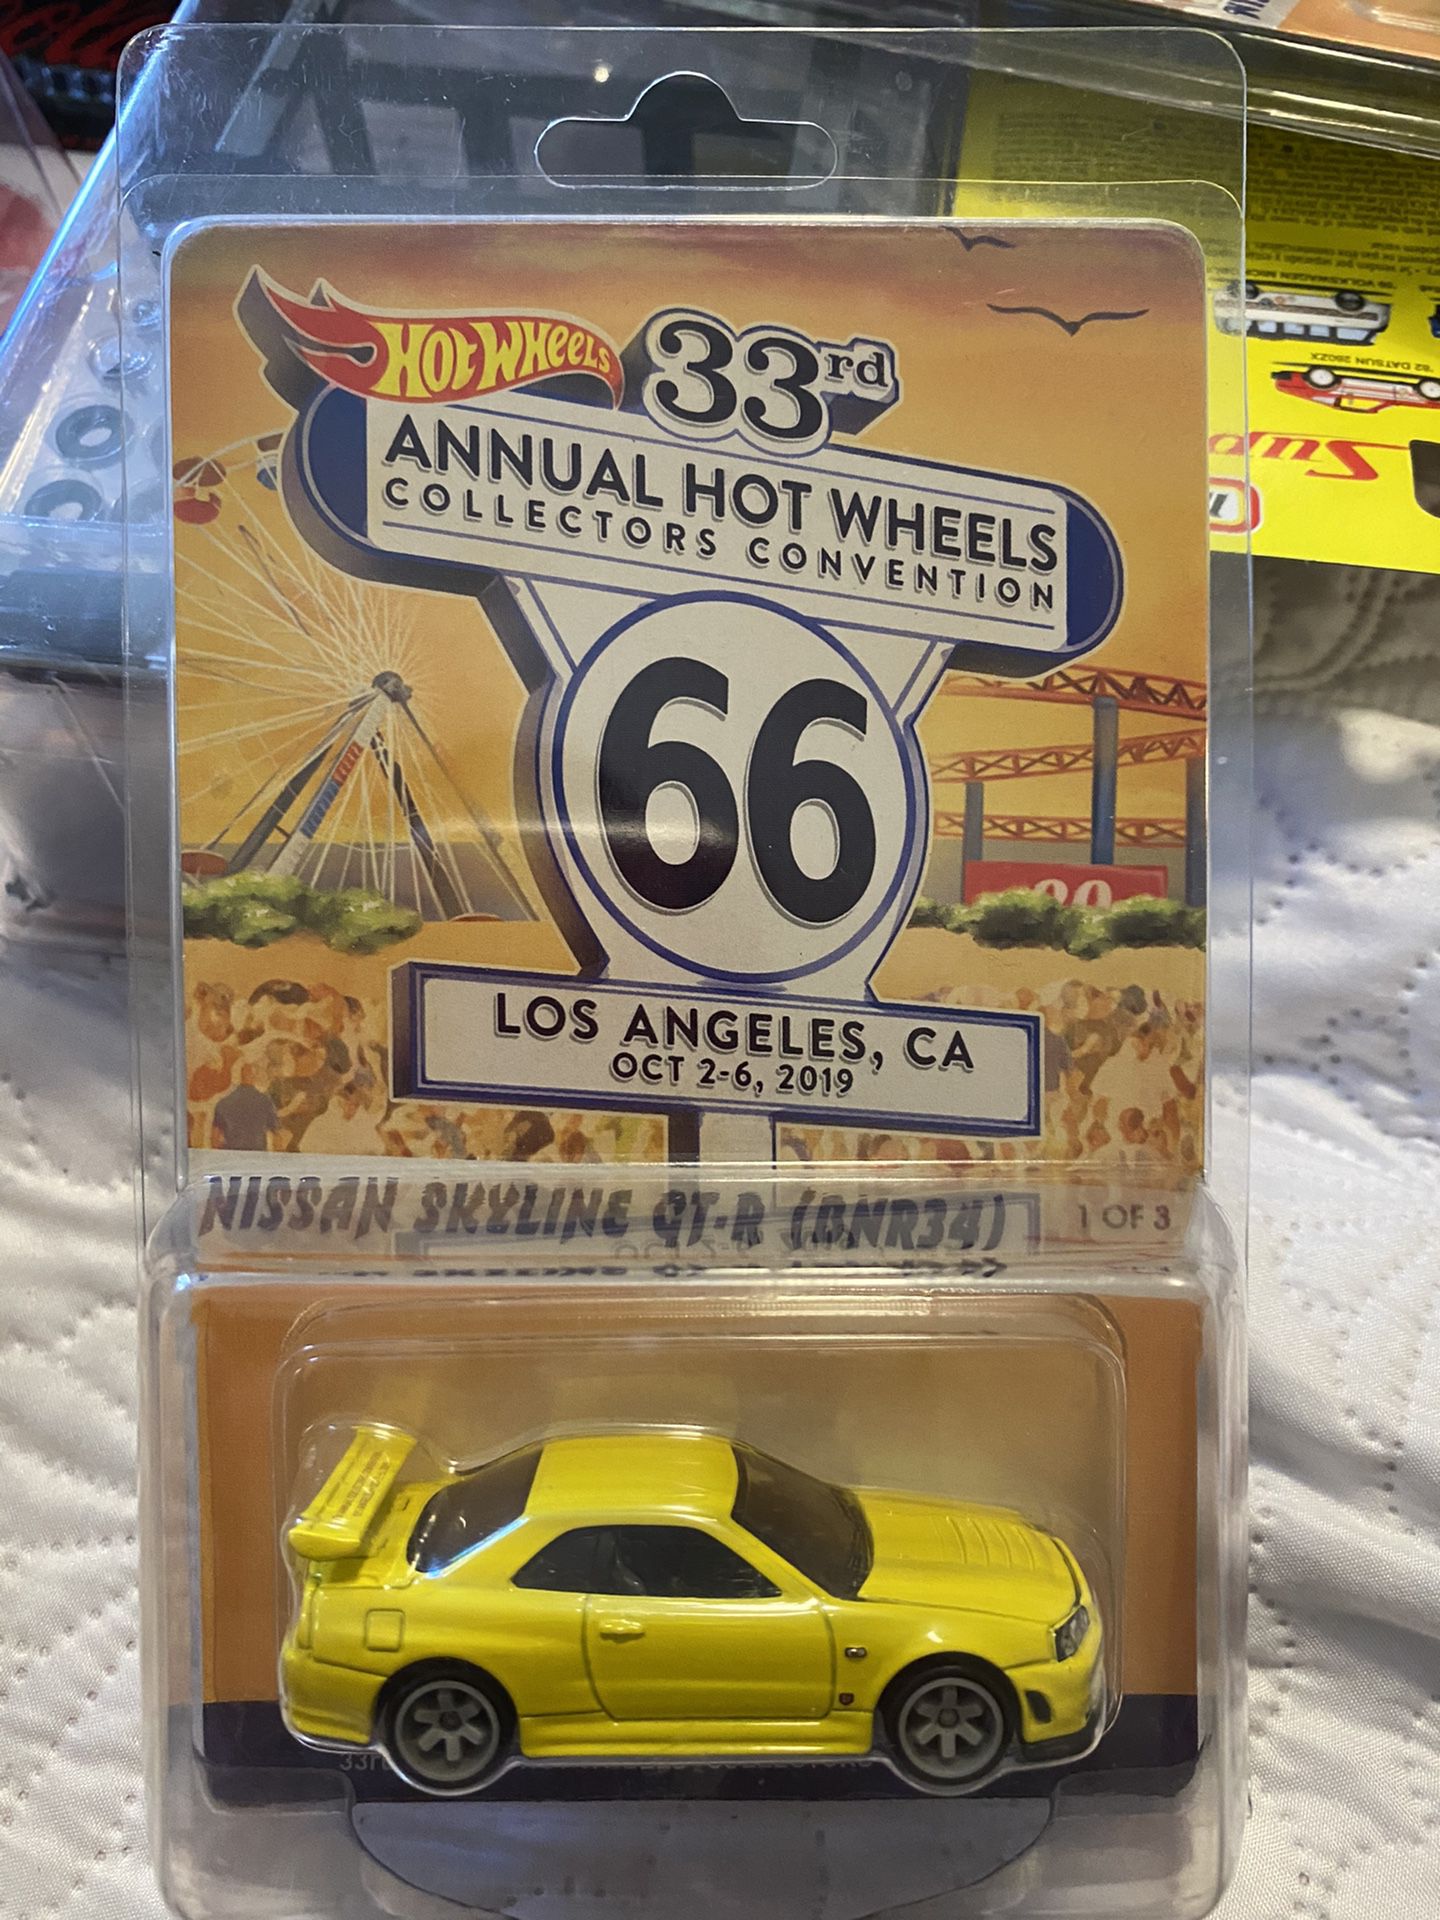 Hot wheels 2019 convention